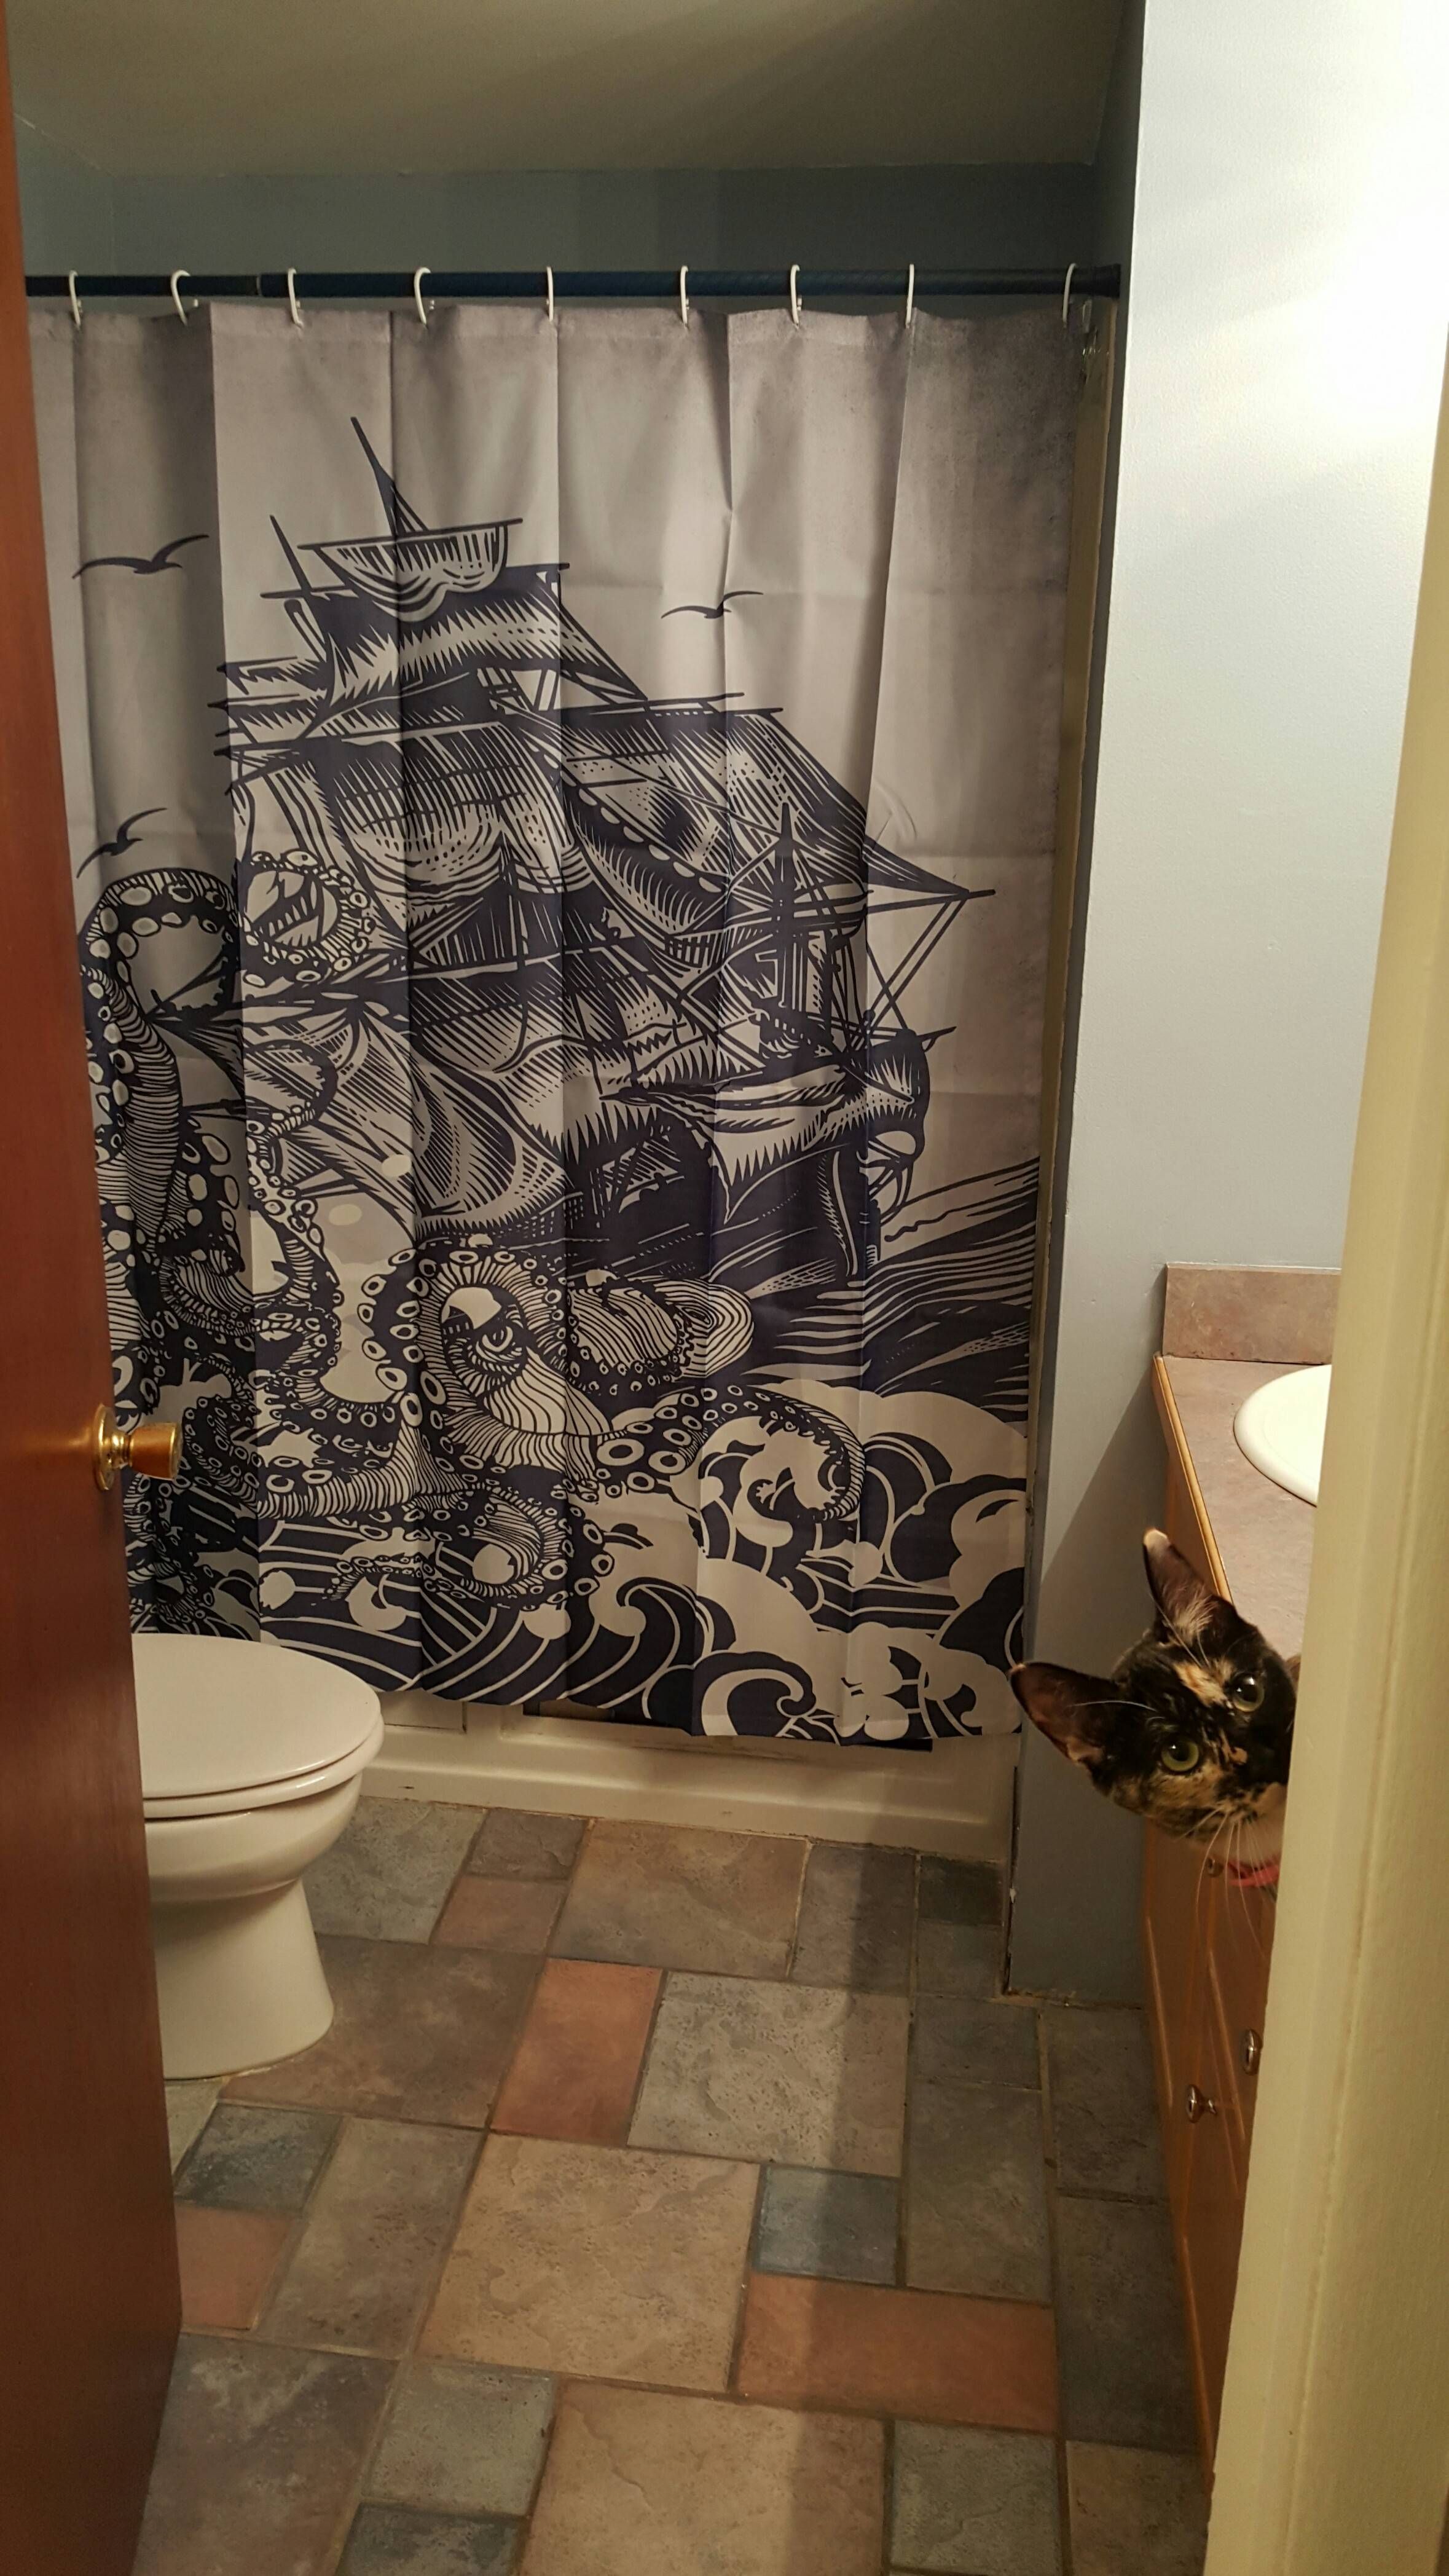 I got a new shower curtain, my cat is on board!